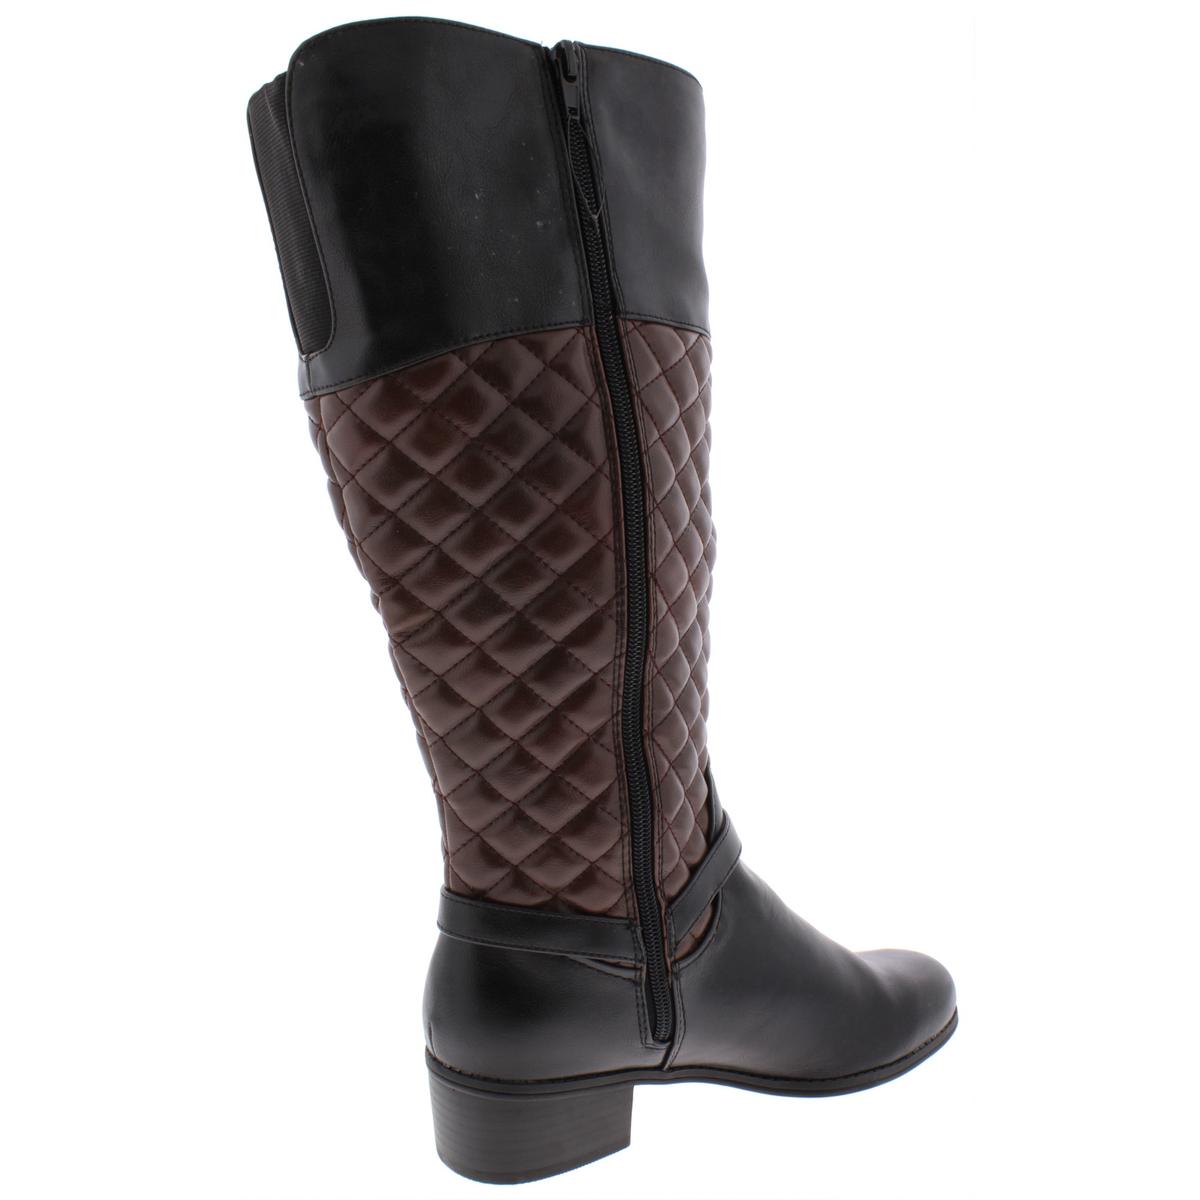 Charter Club Womens Helenn 2 Wide Calf Faux Leather Riding Boots Shoes BHFO 6869 | eBay